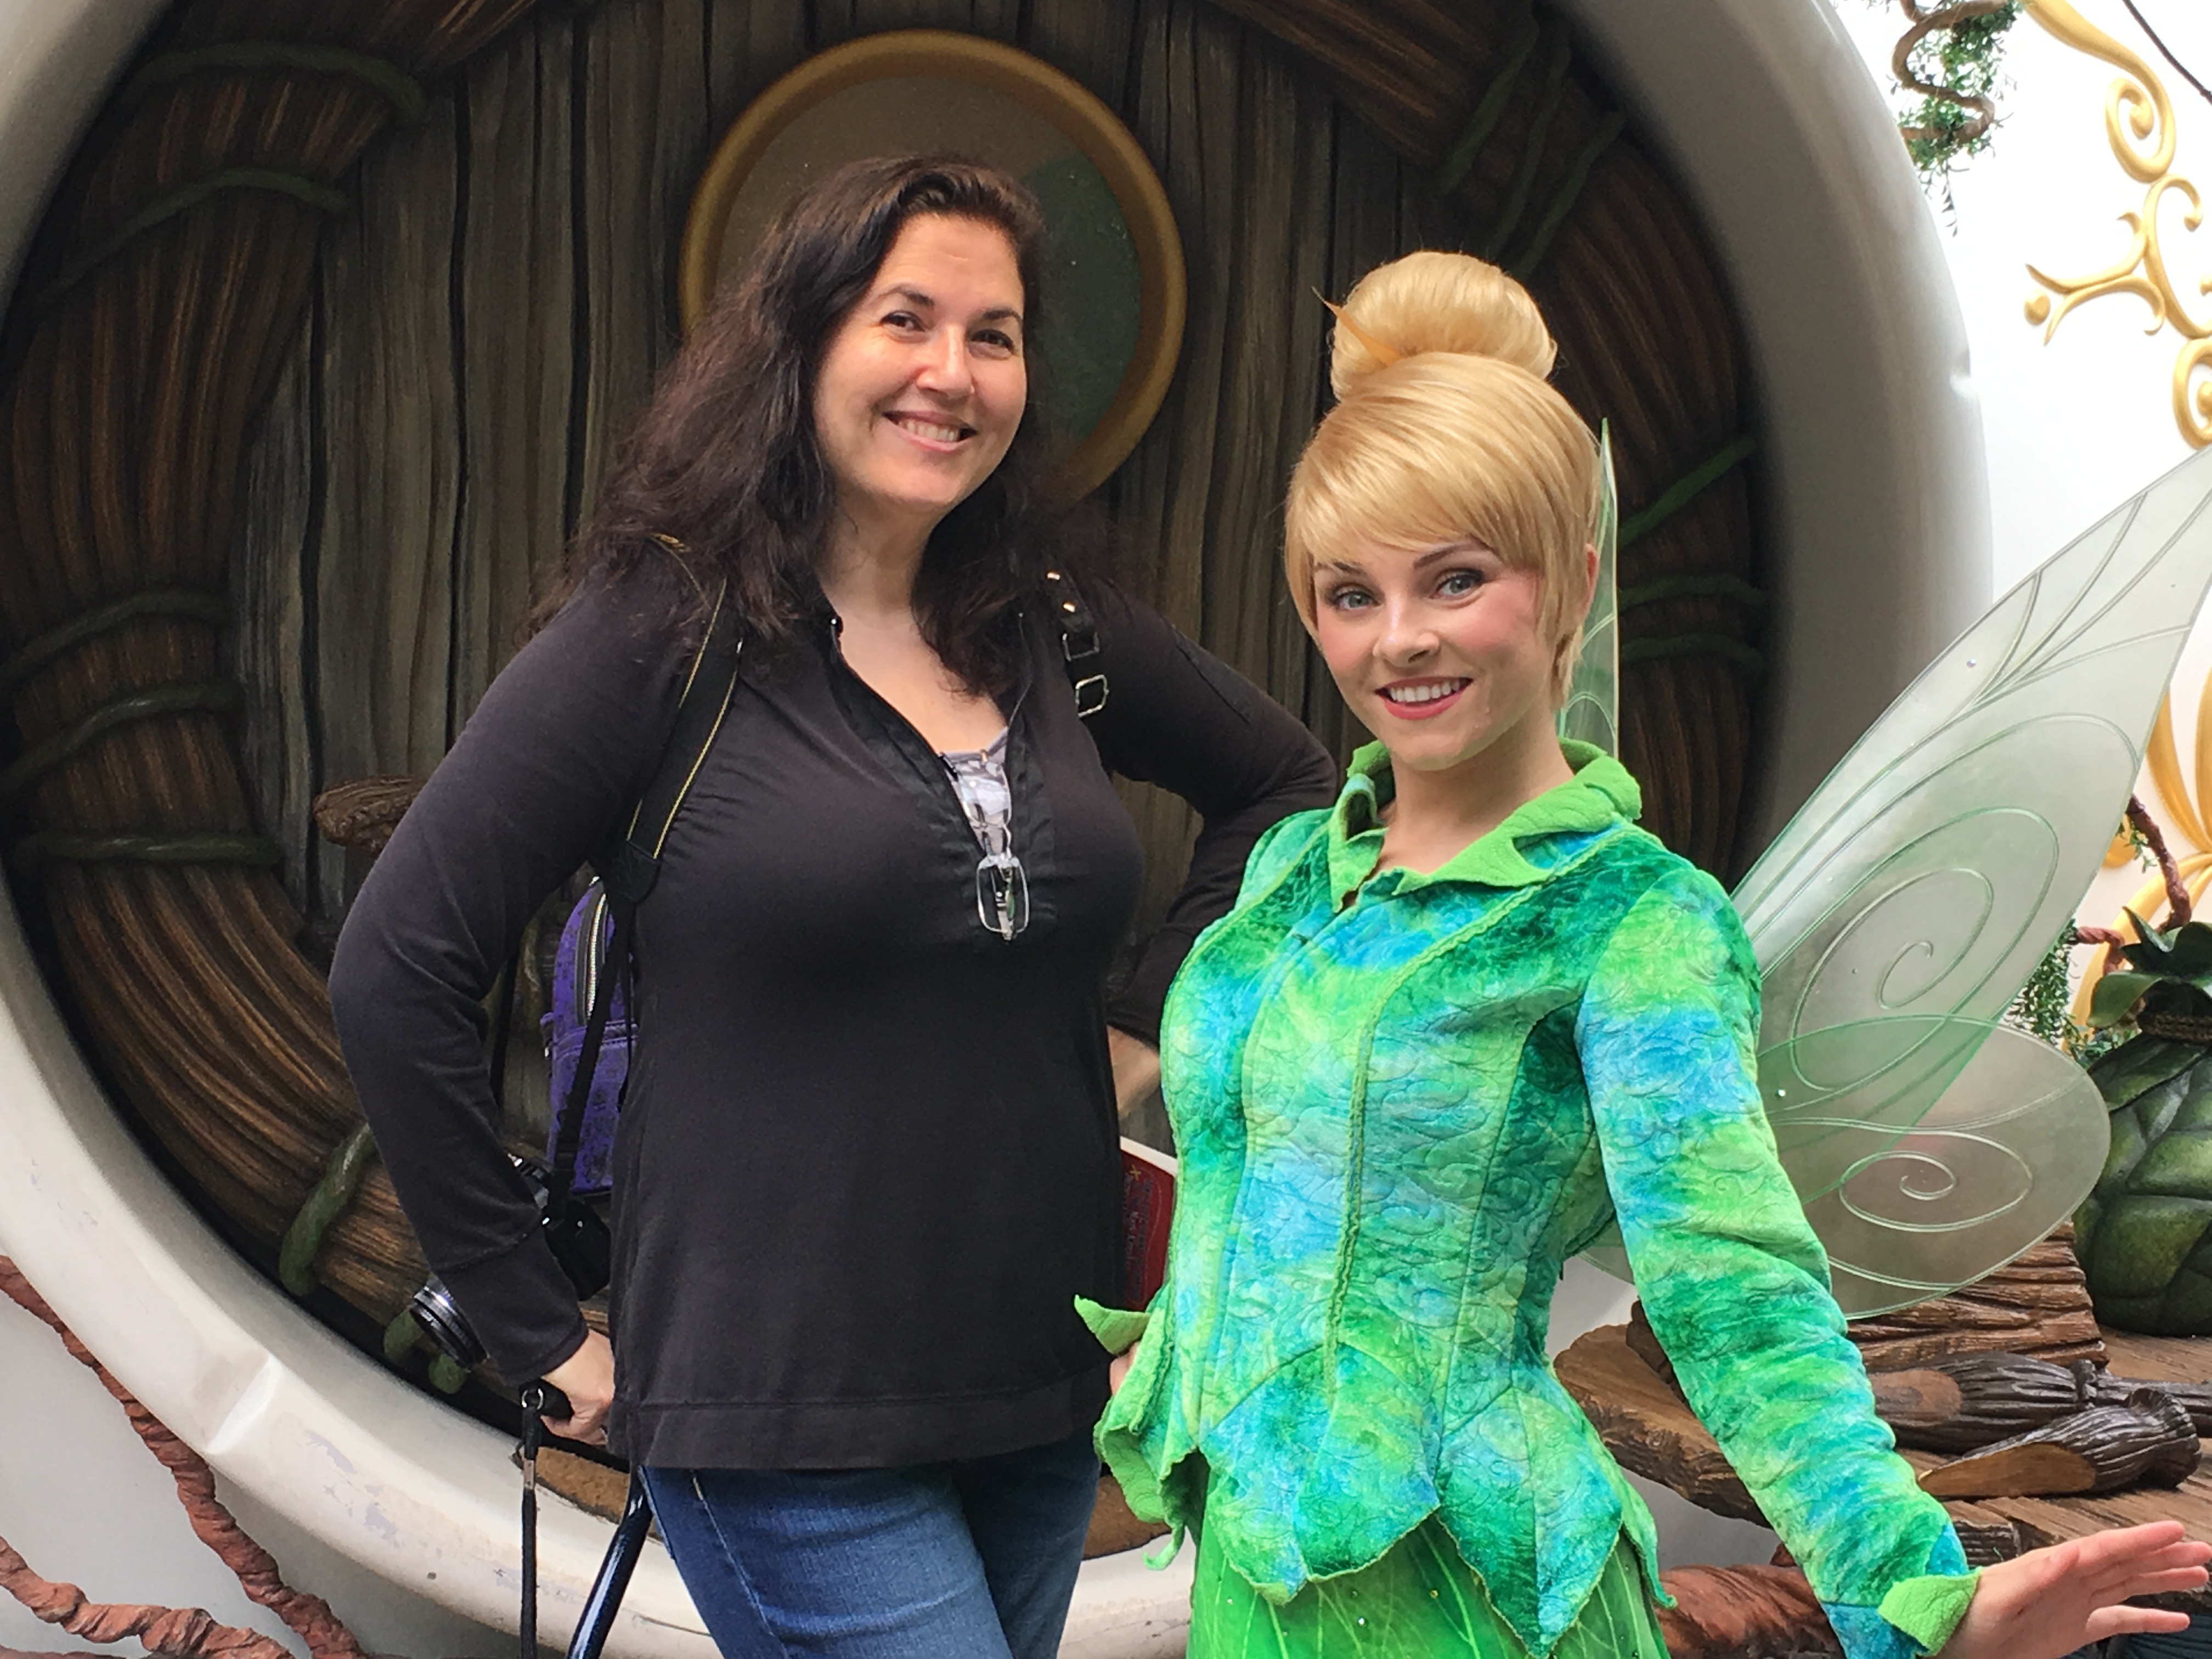 Catherine with Tinkerbell